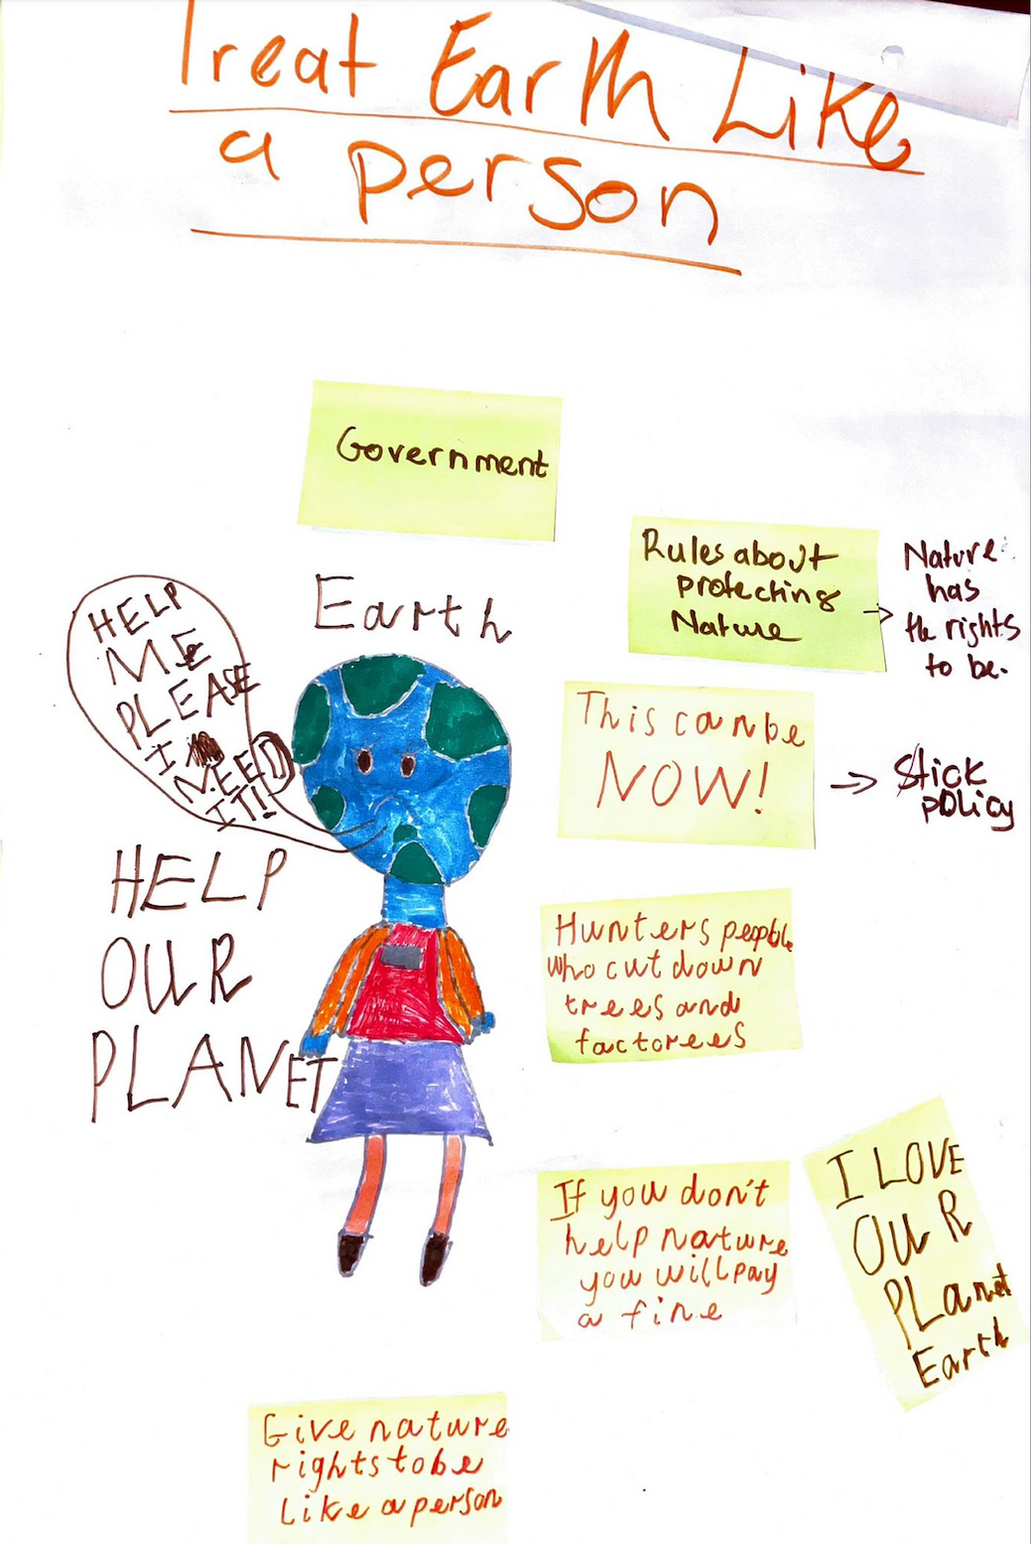 A childs drawing, where the earth is pertrayed a little girl wtih sayings written aroud them such as help our planet.